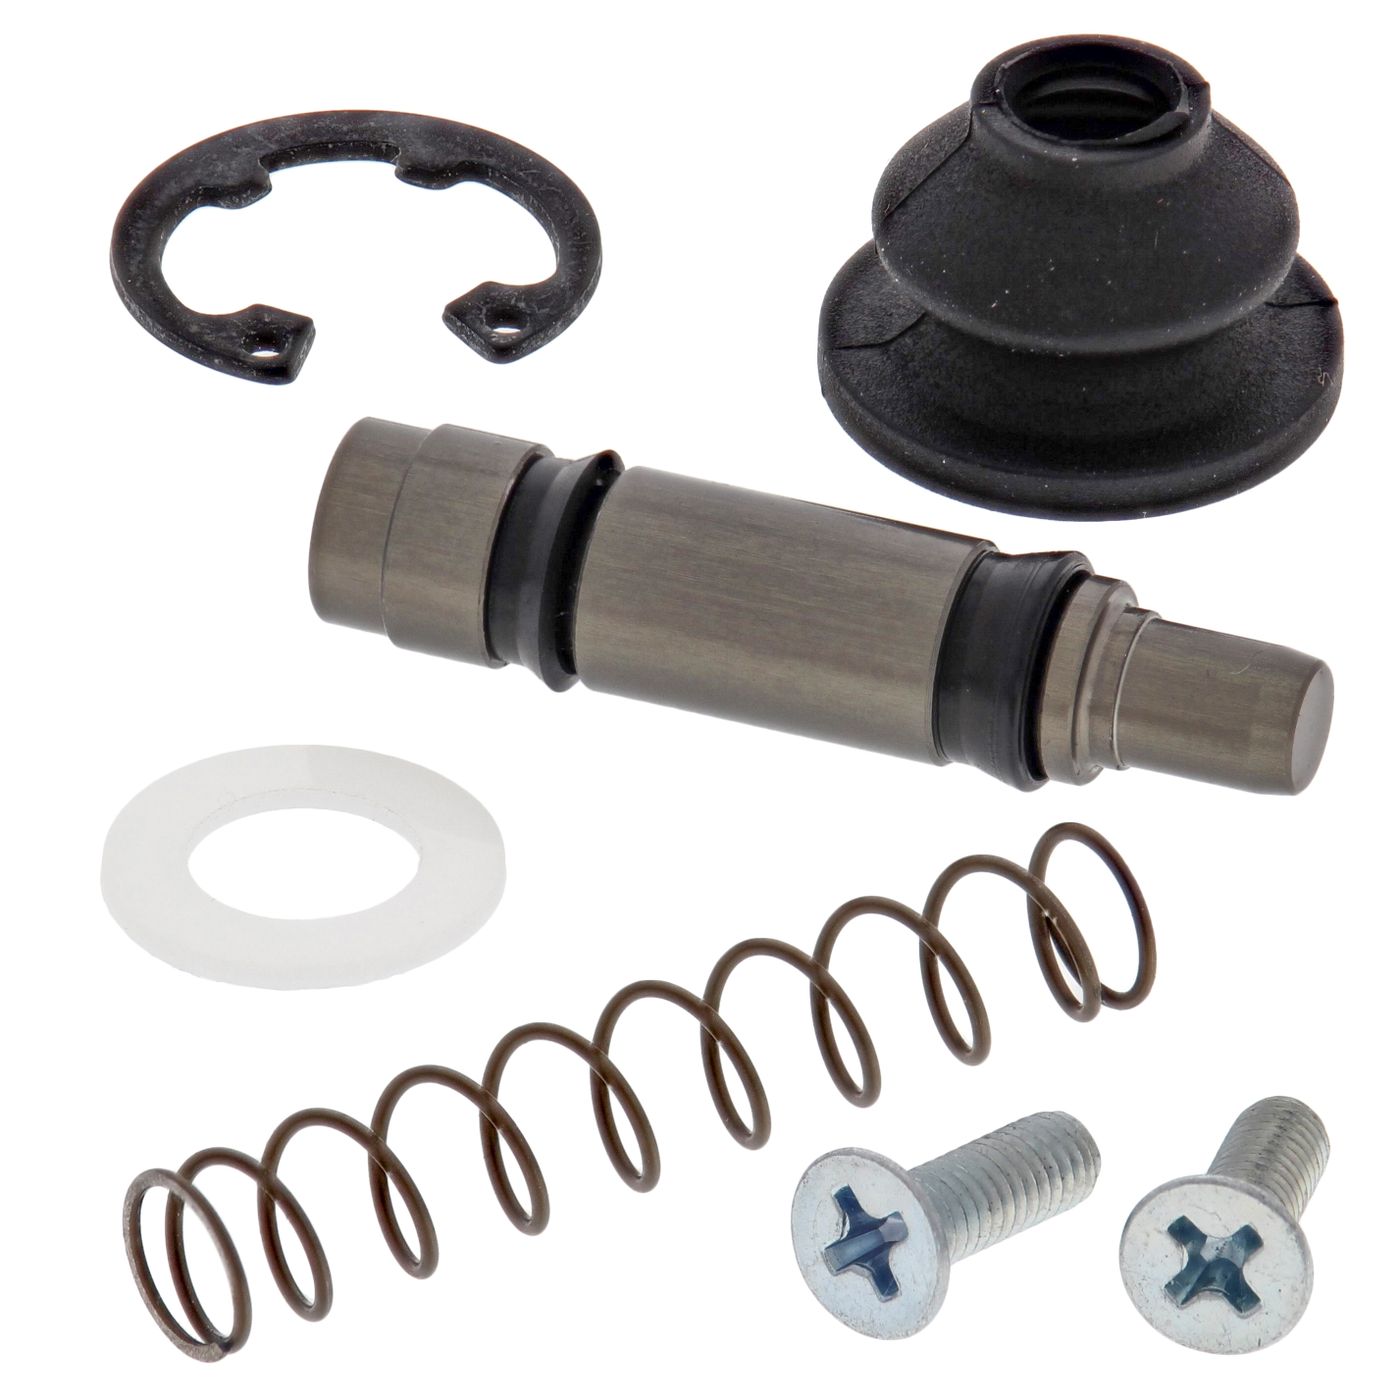 Wrp Clutch Master Cylinder Kit - WRP184004 image